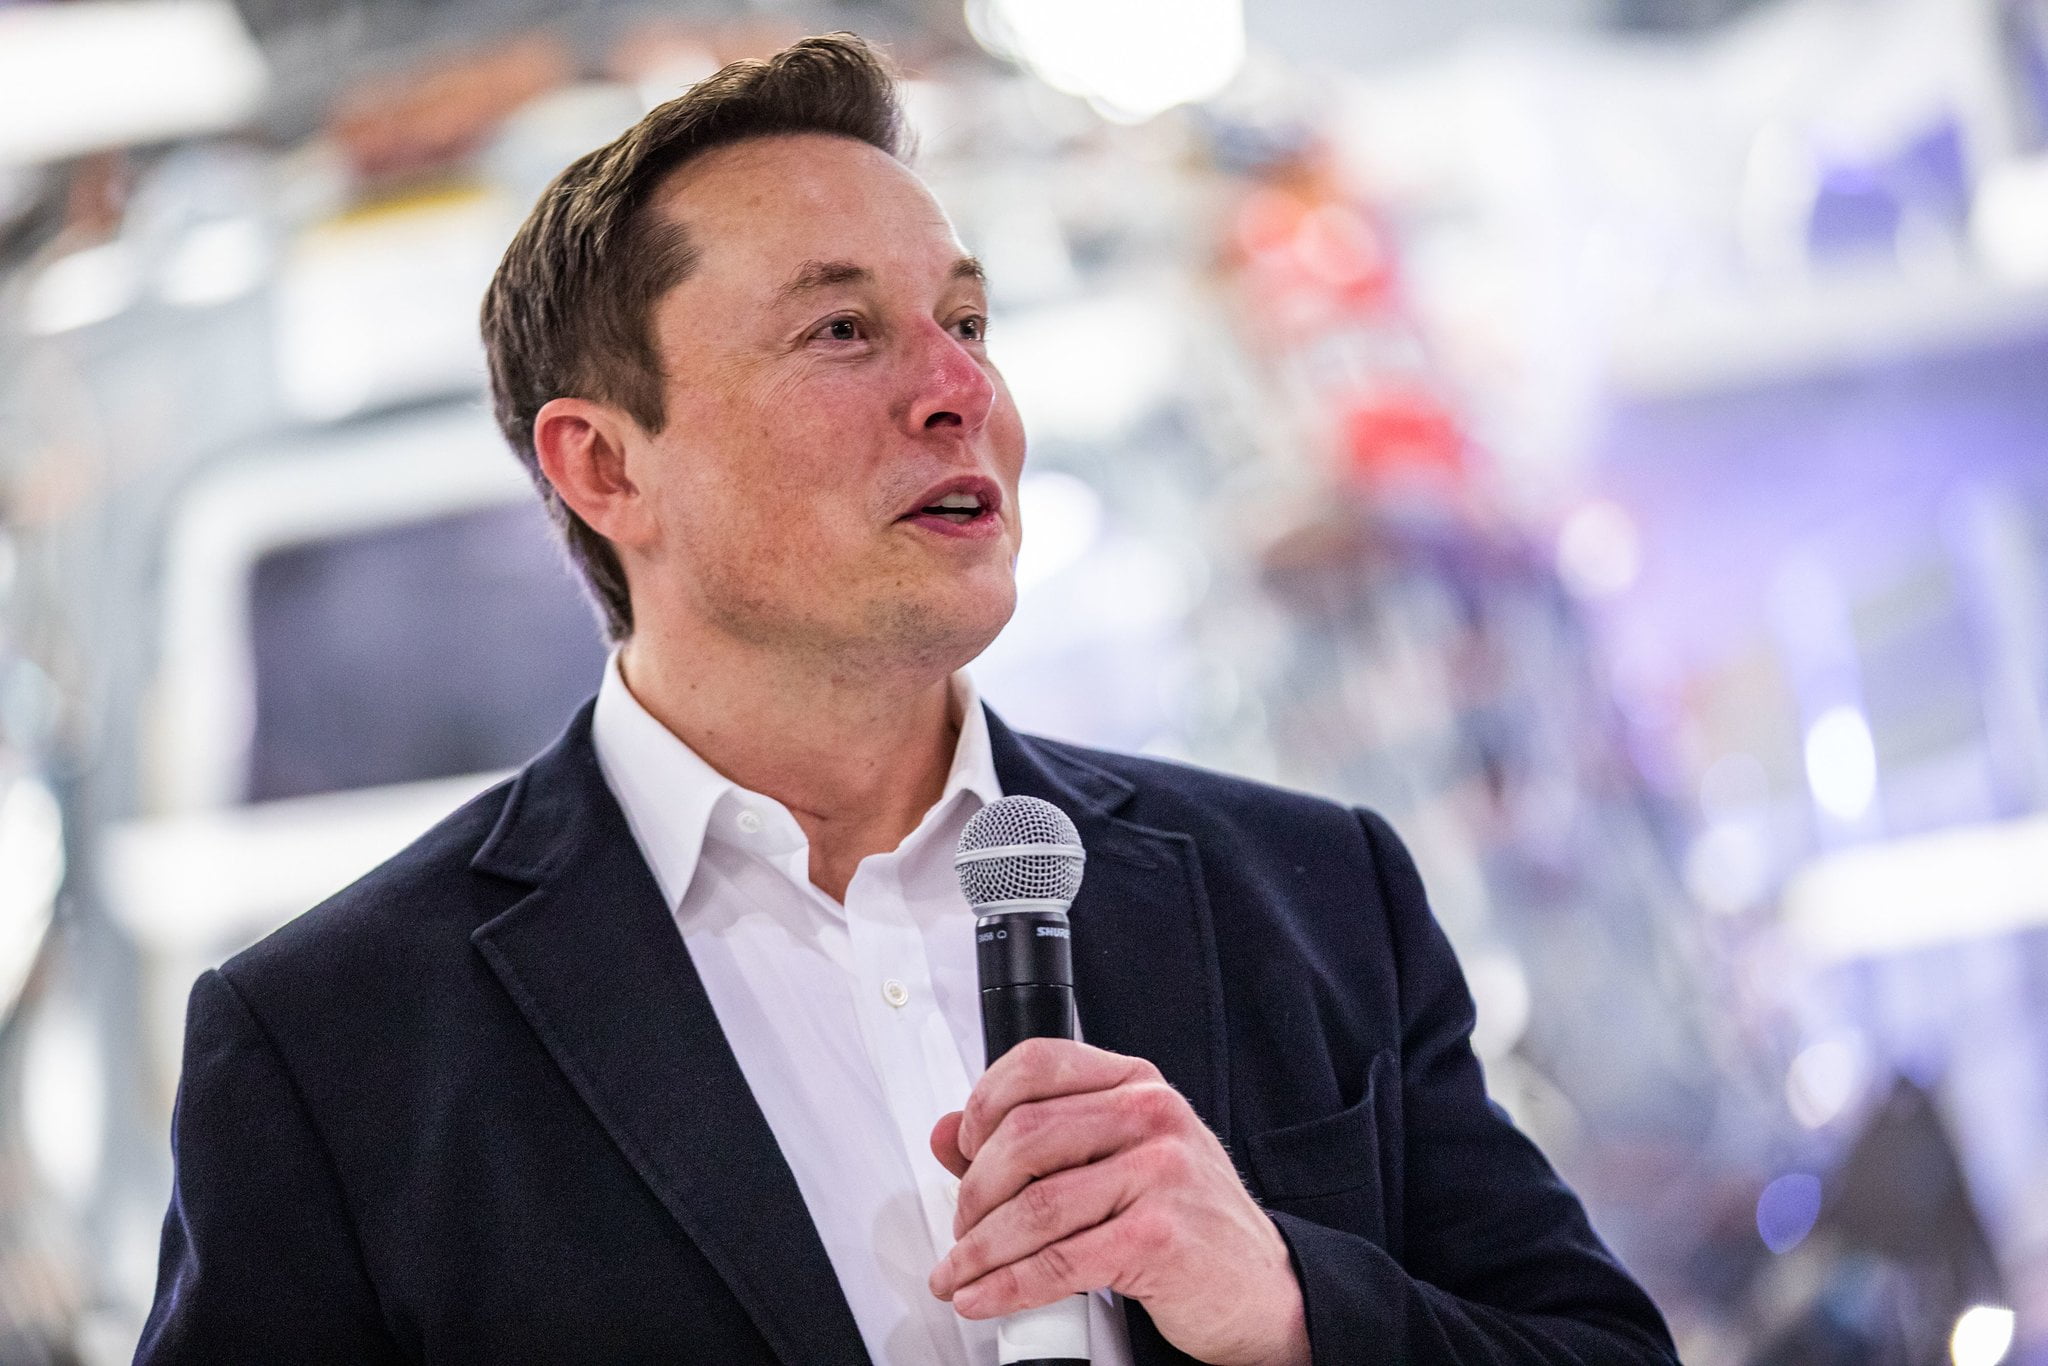 Elon Musk says: "Stop wasting time on PowerPoint" at WSJ CEO Summit